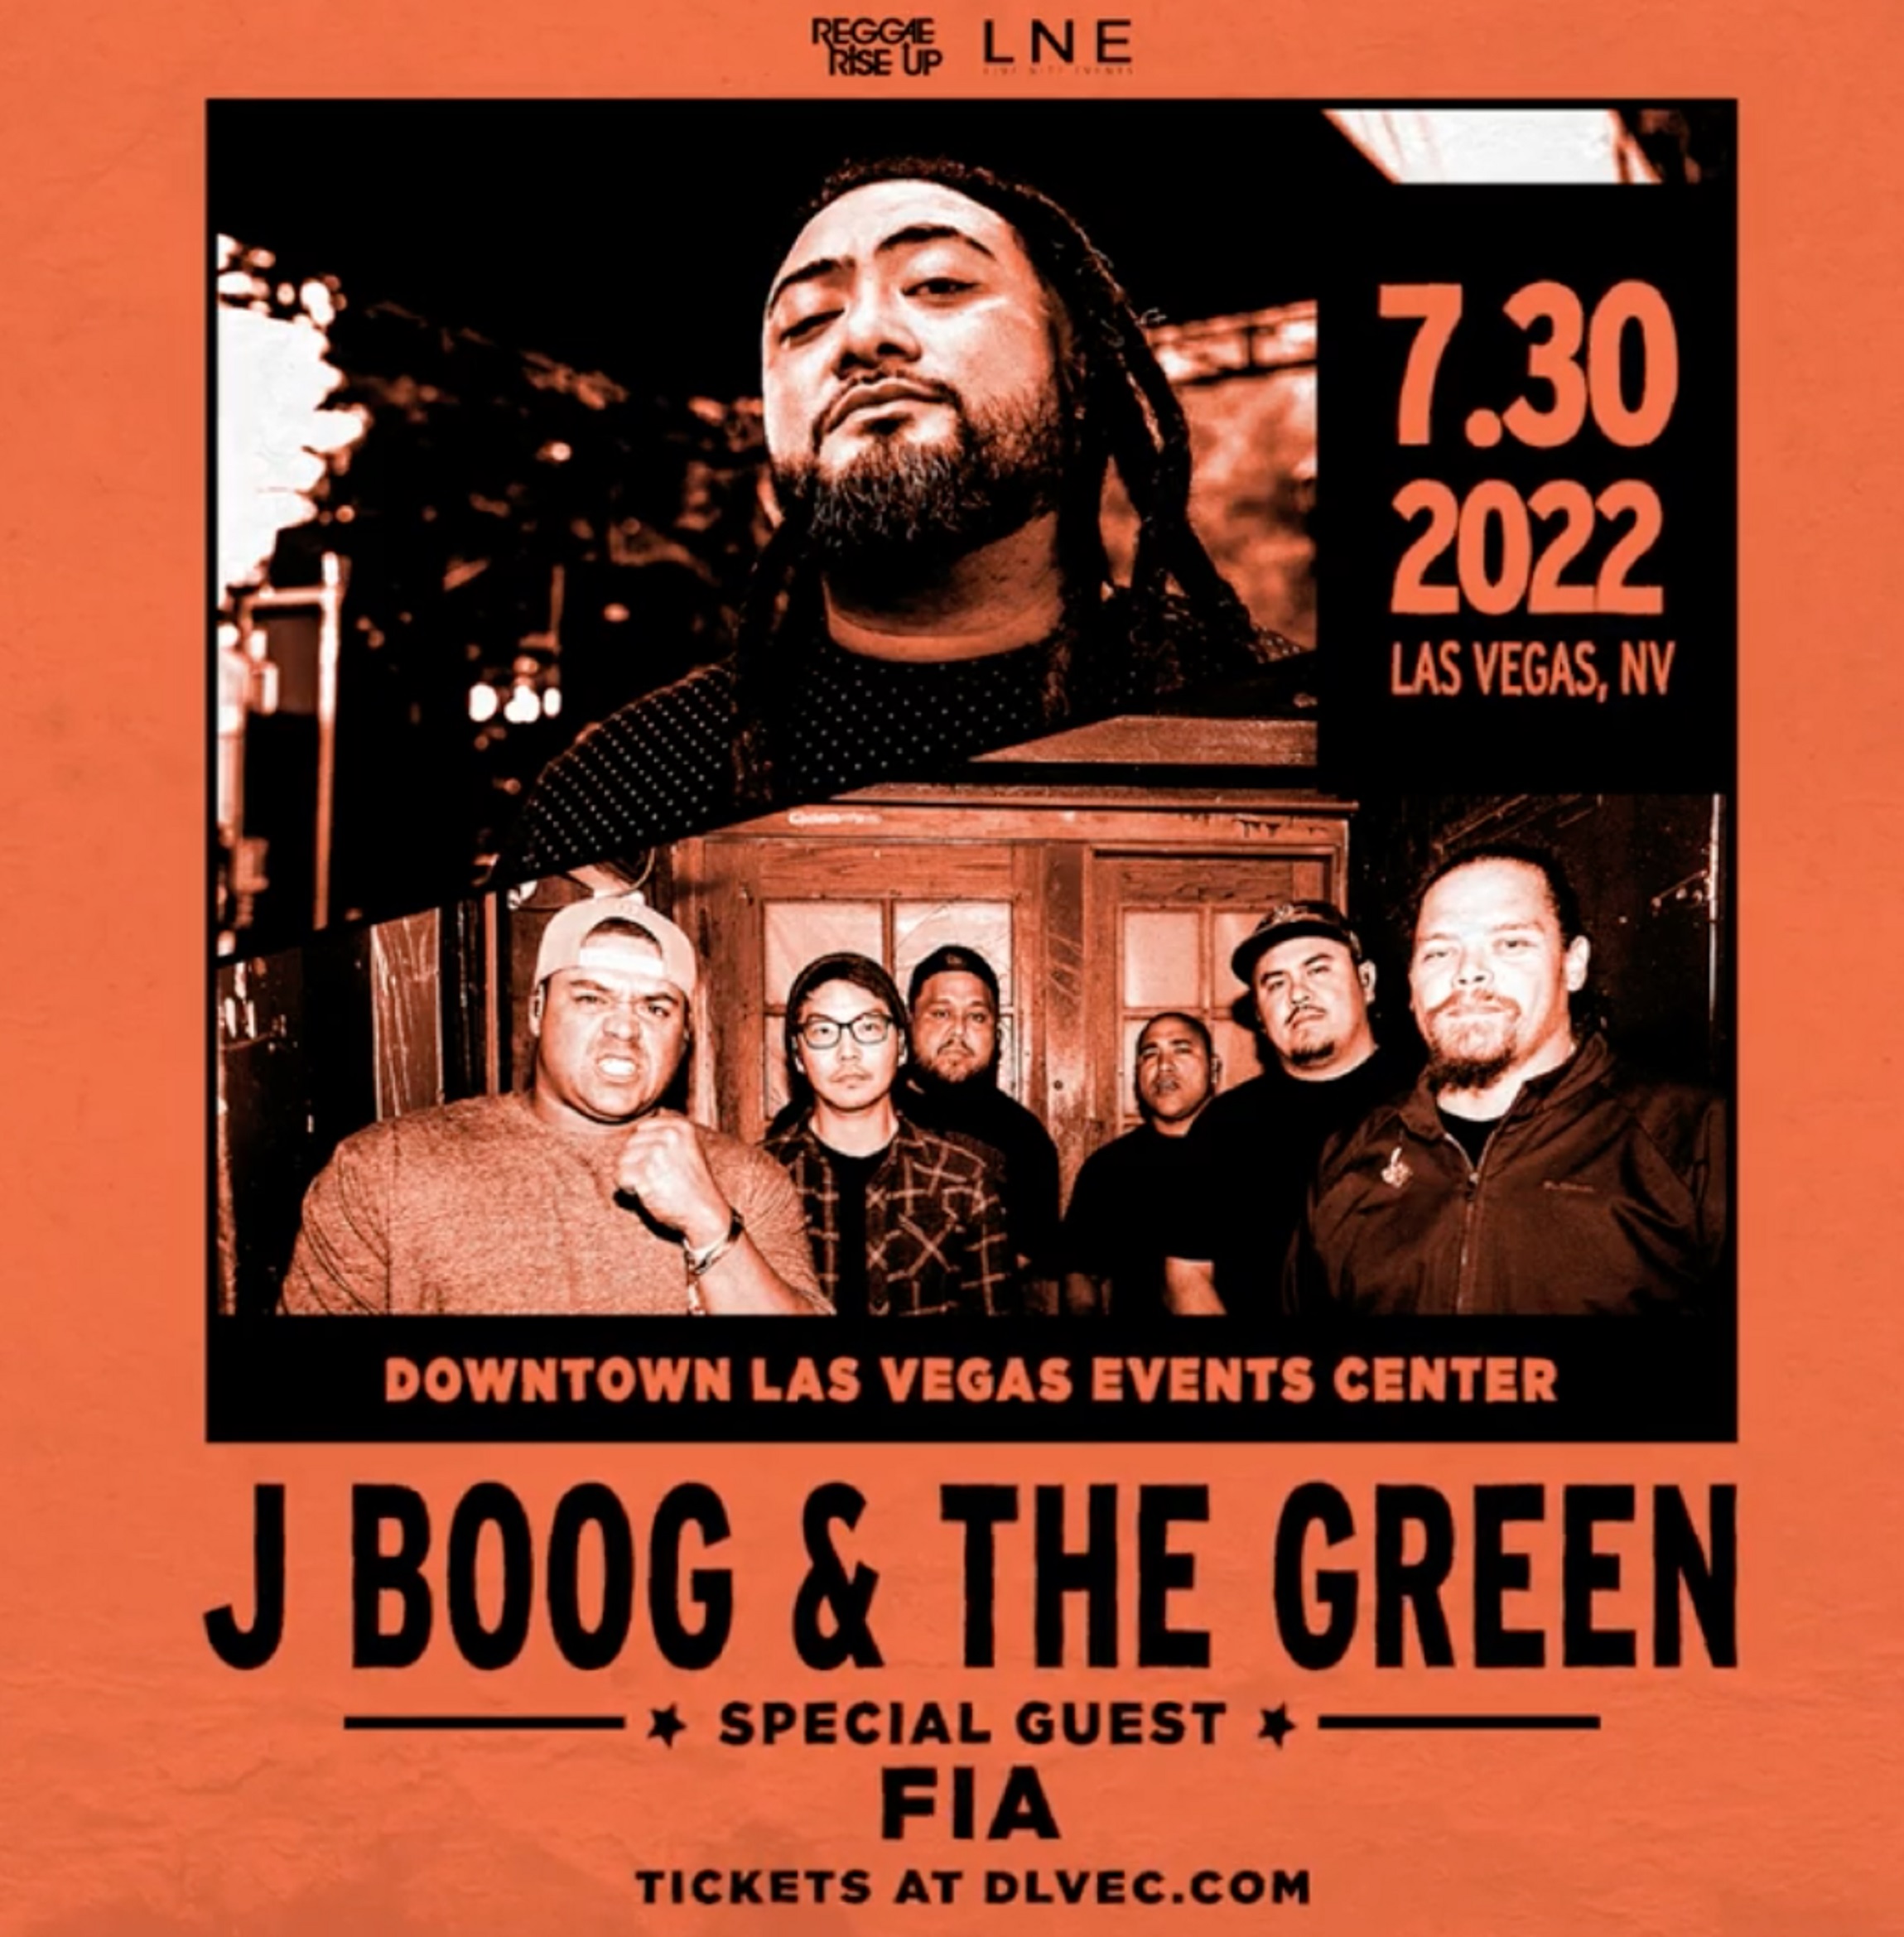 THE DOWNTOWN LAS VEGAS EVENTS CENTER PRESENTS J BOOG & THE GREEN, SATURDAY JULY 30